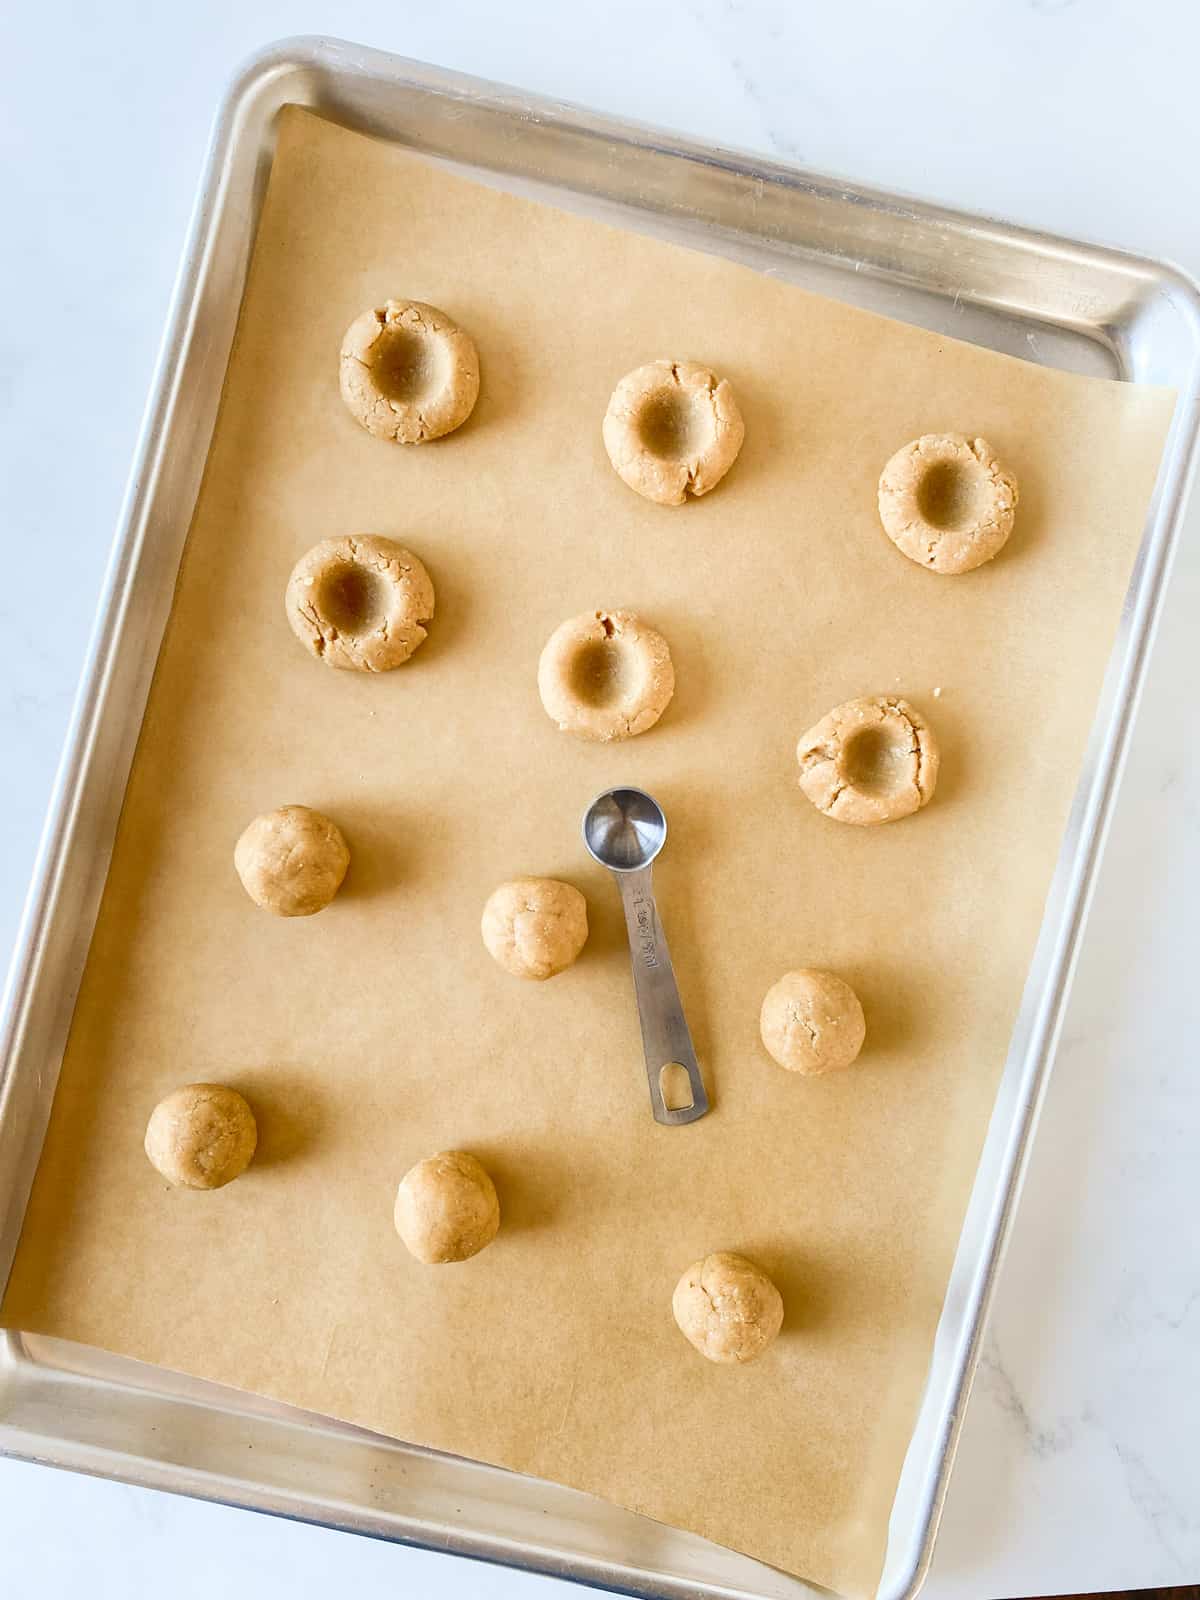 Unbaked cookies on a cookie sheet, showing using a teaspoon to make indentations in thumbprint cookies.